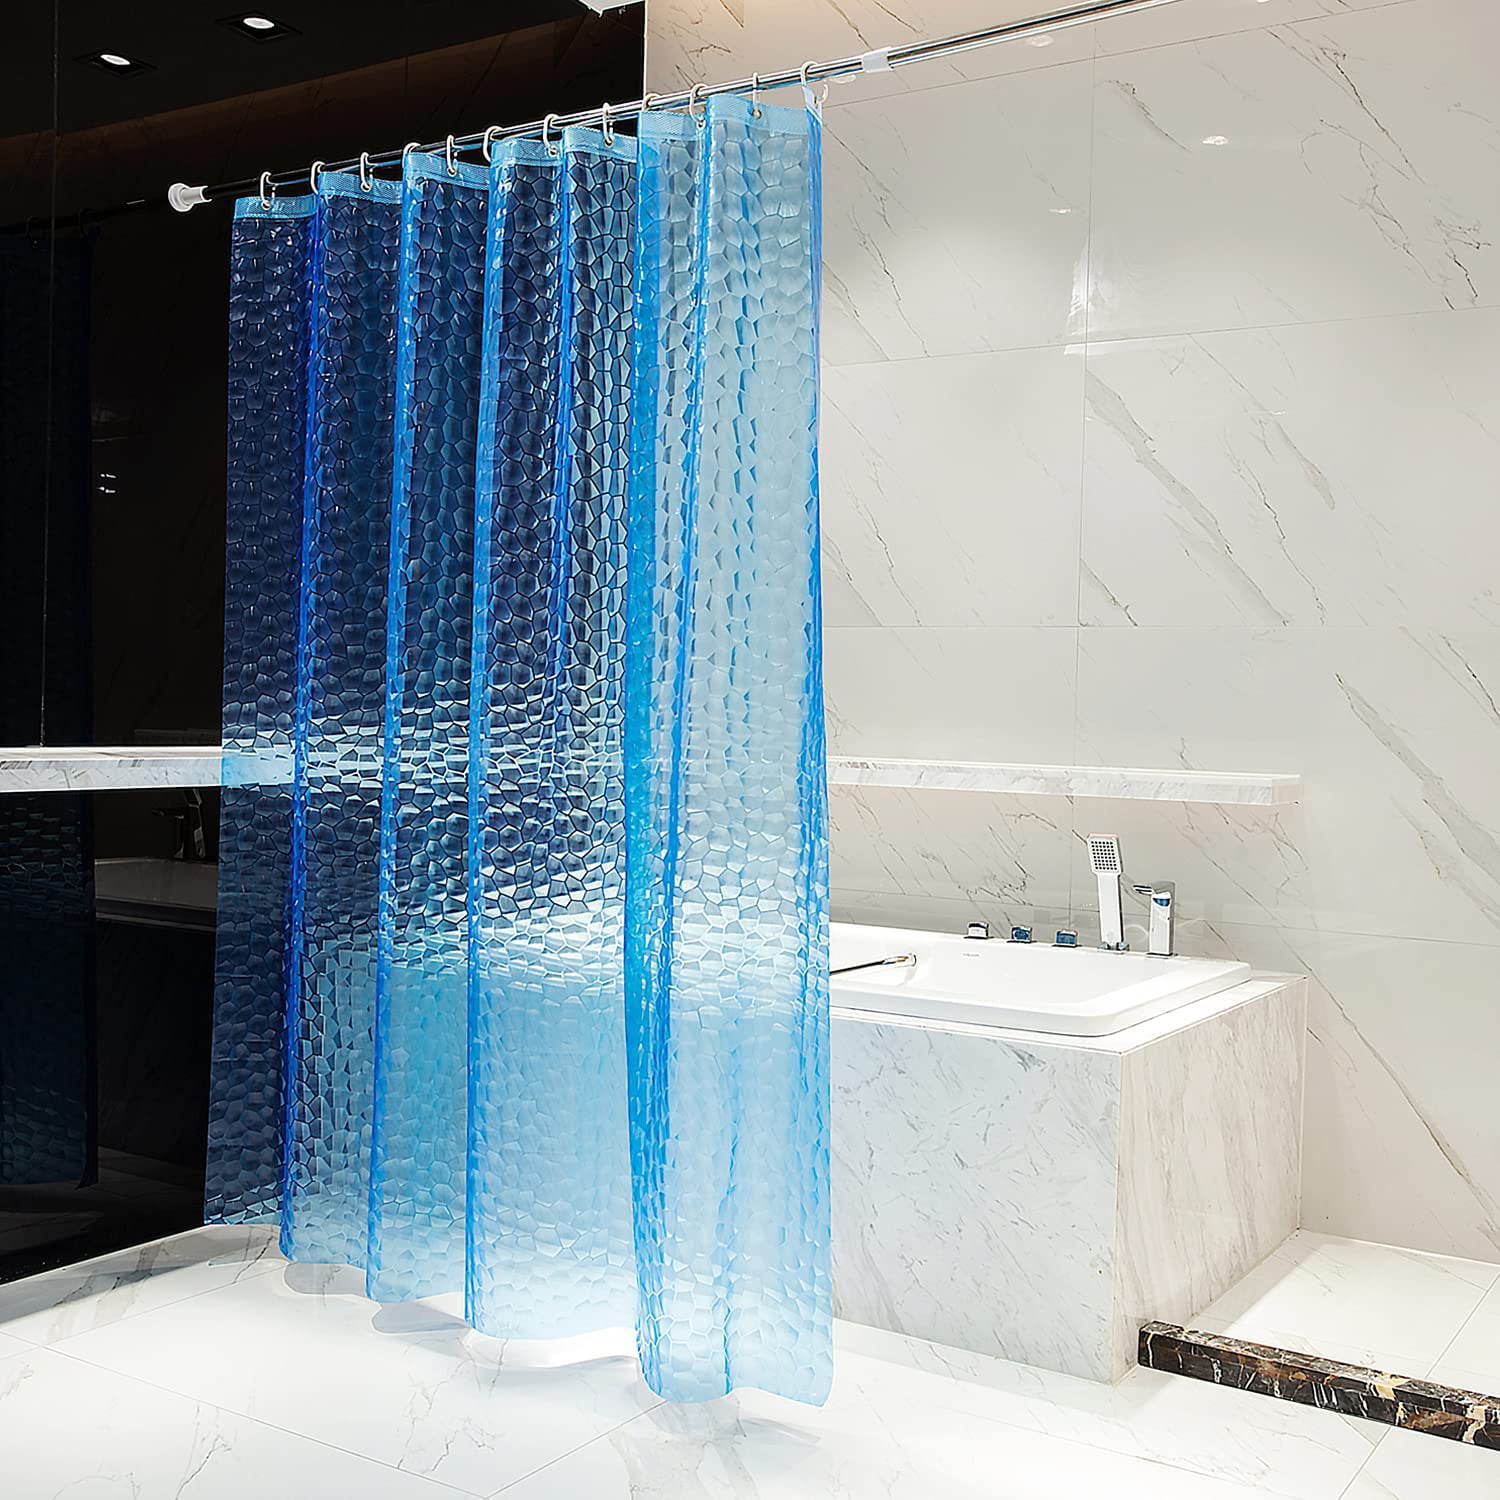 Details about   Shower Curtains Waterproof Thick Bath Curtains For Bathtub Large Covers 12 Hooks 